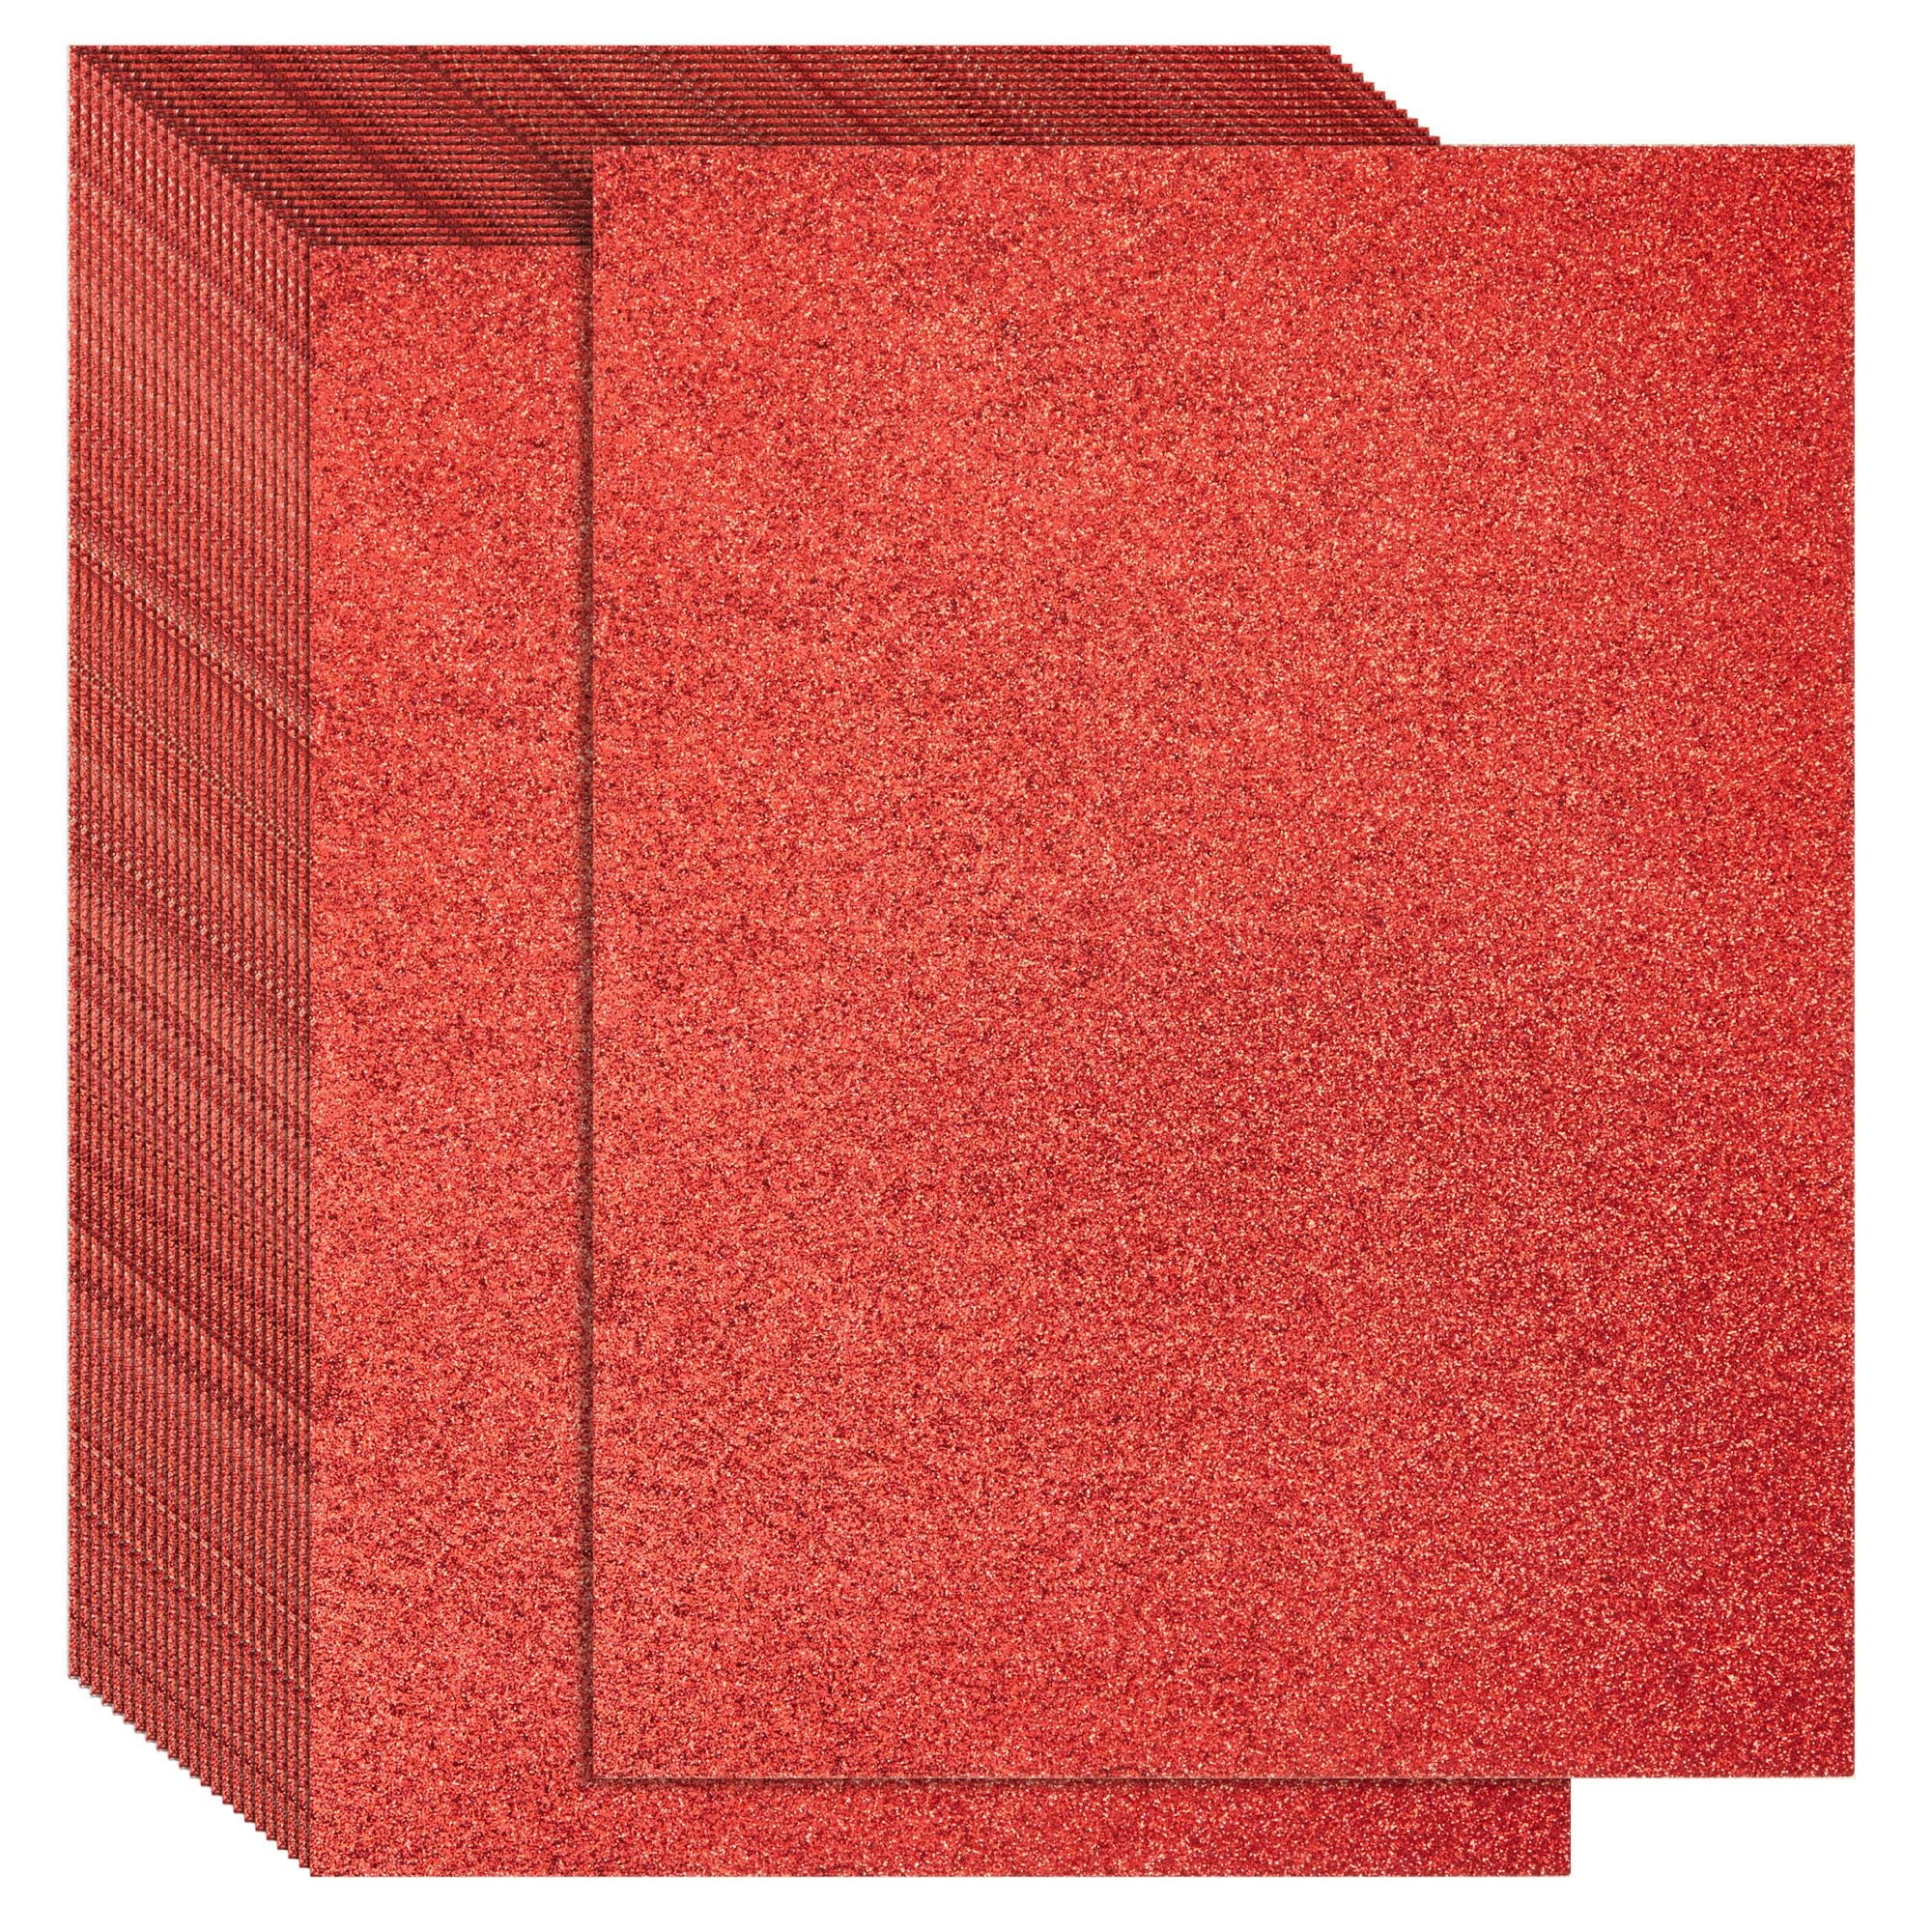 24 Sheets Red Glitter Cardstock Paper 8.5 x 11 for Scrapbooking, DIY  Projects, Arts and Crafts (280gsm)